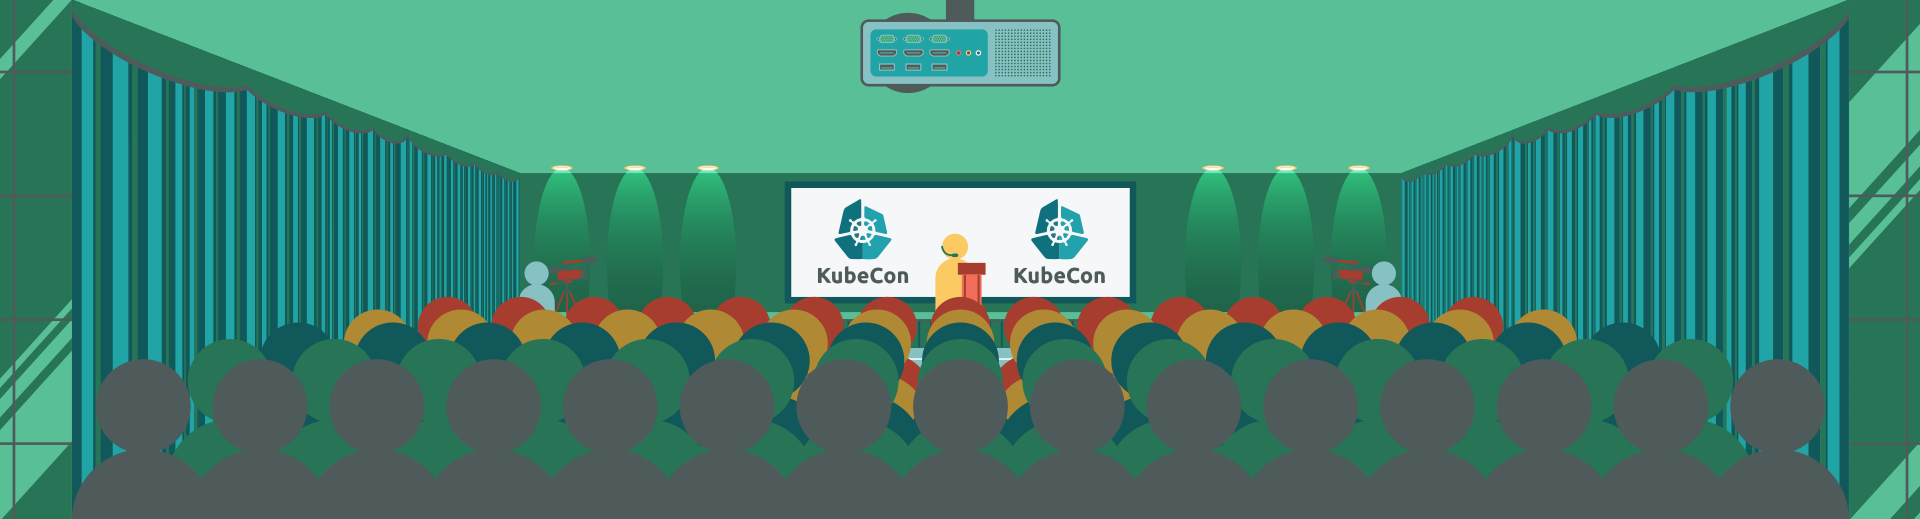 An illustration of a KubeCon keynote speech with a packed audience